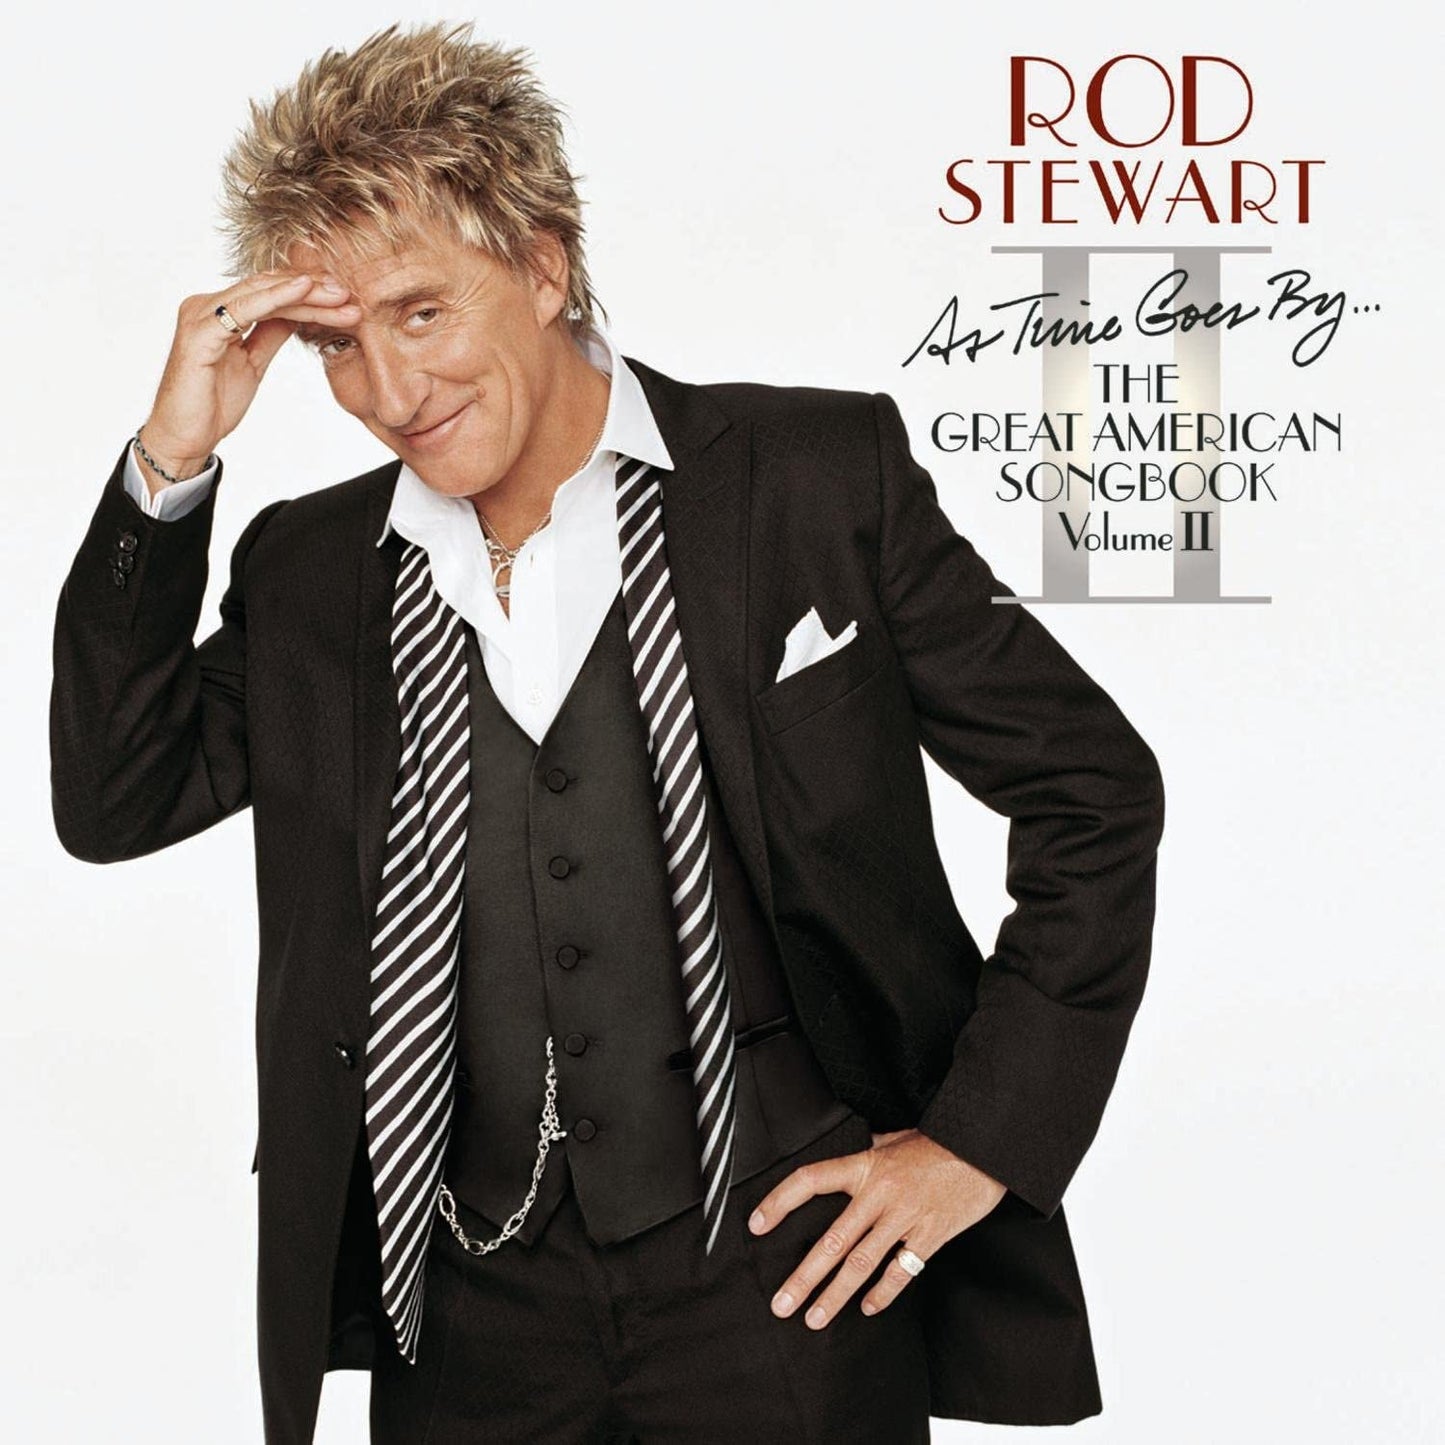 Rod Stewart – As Time Goes By... The Great American Songbook Vol. II - USED CD